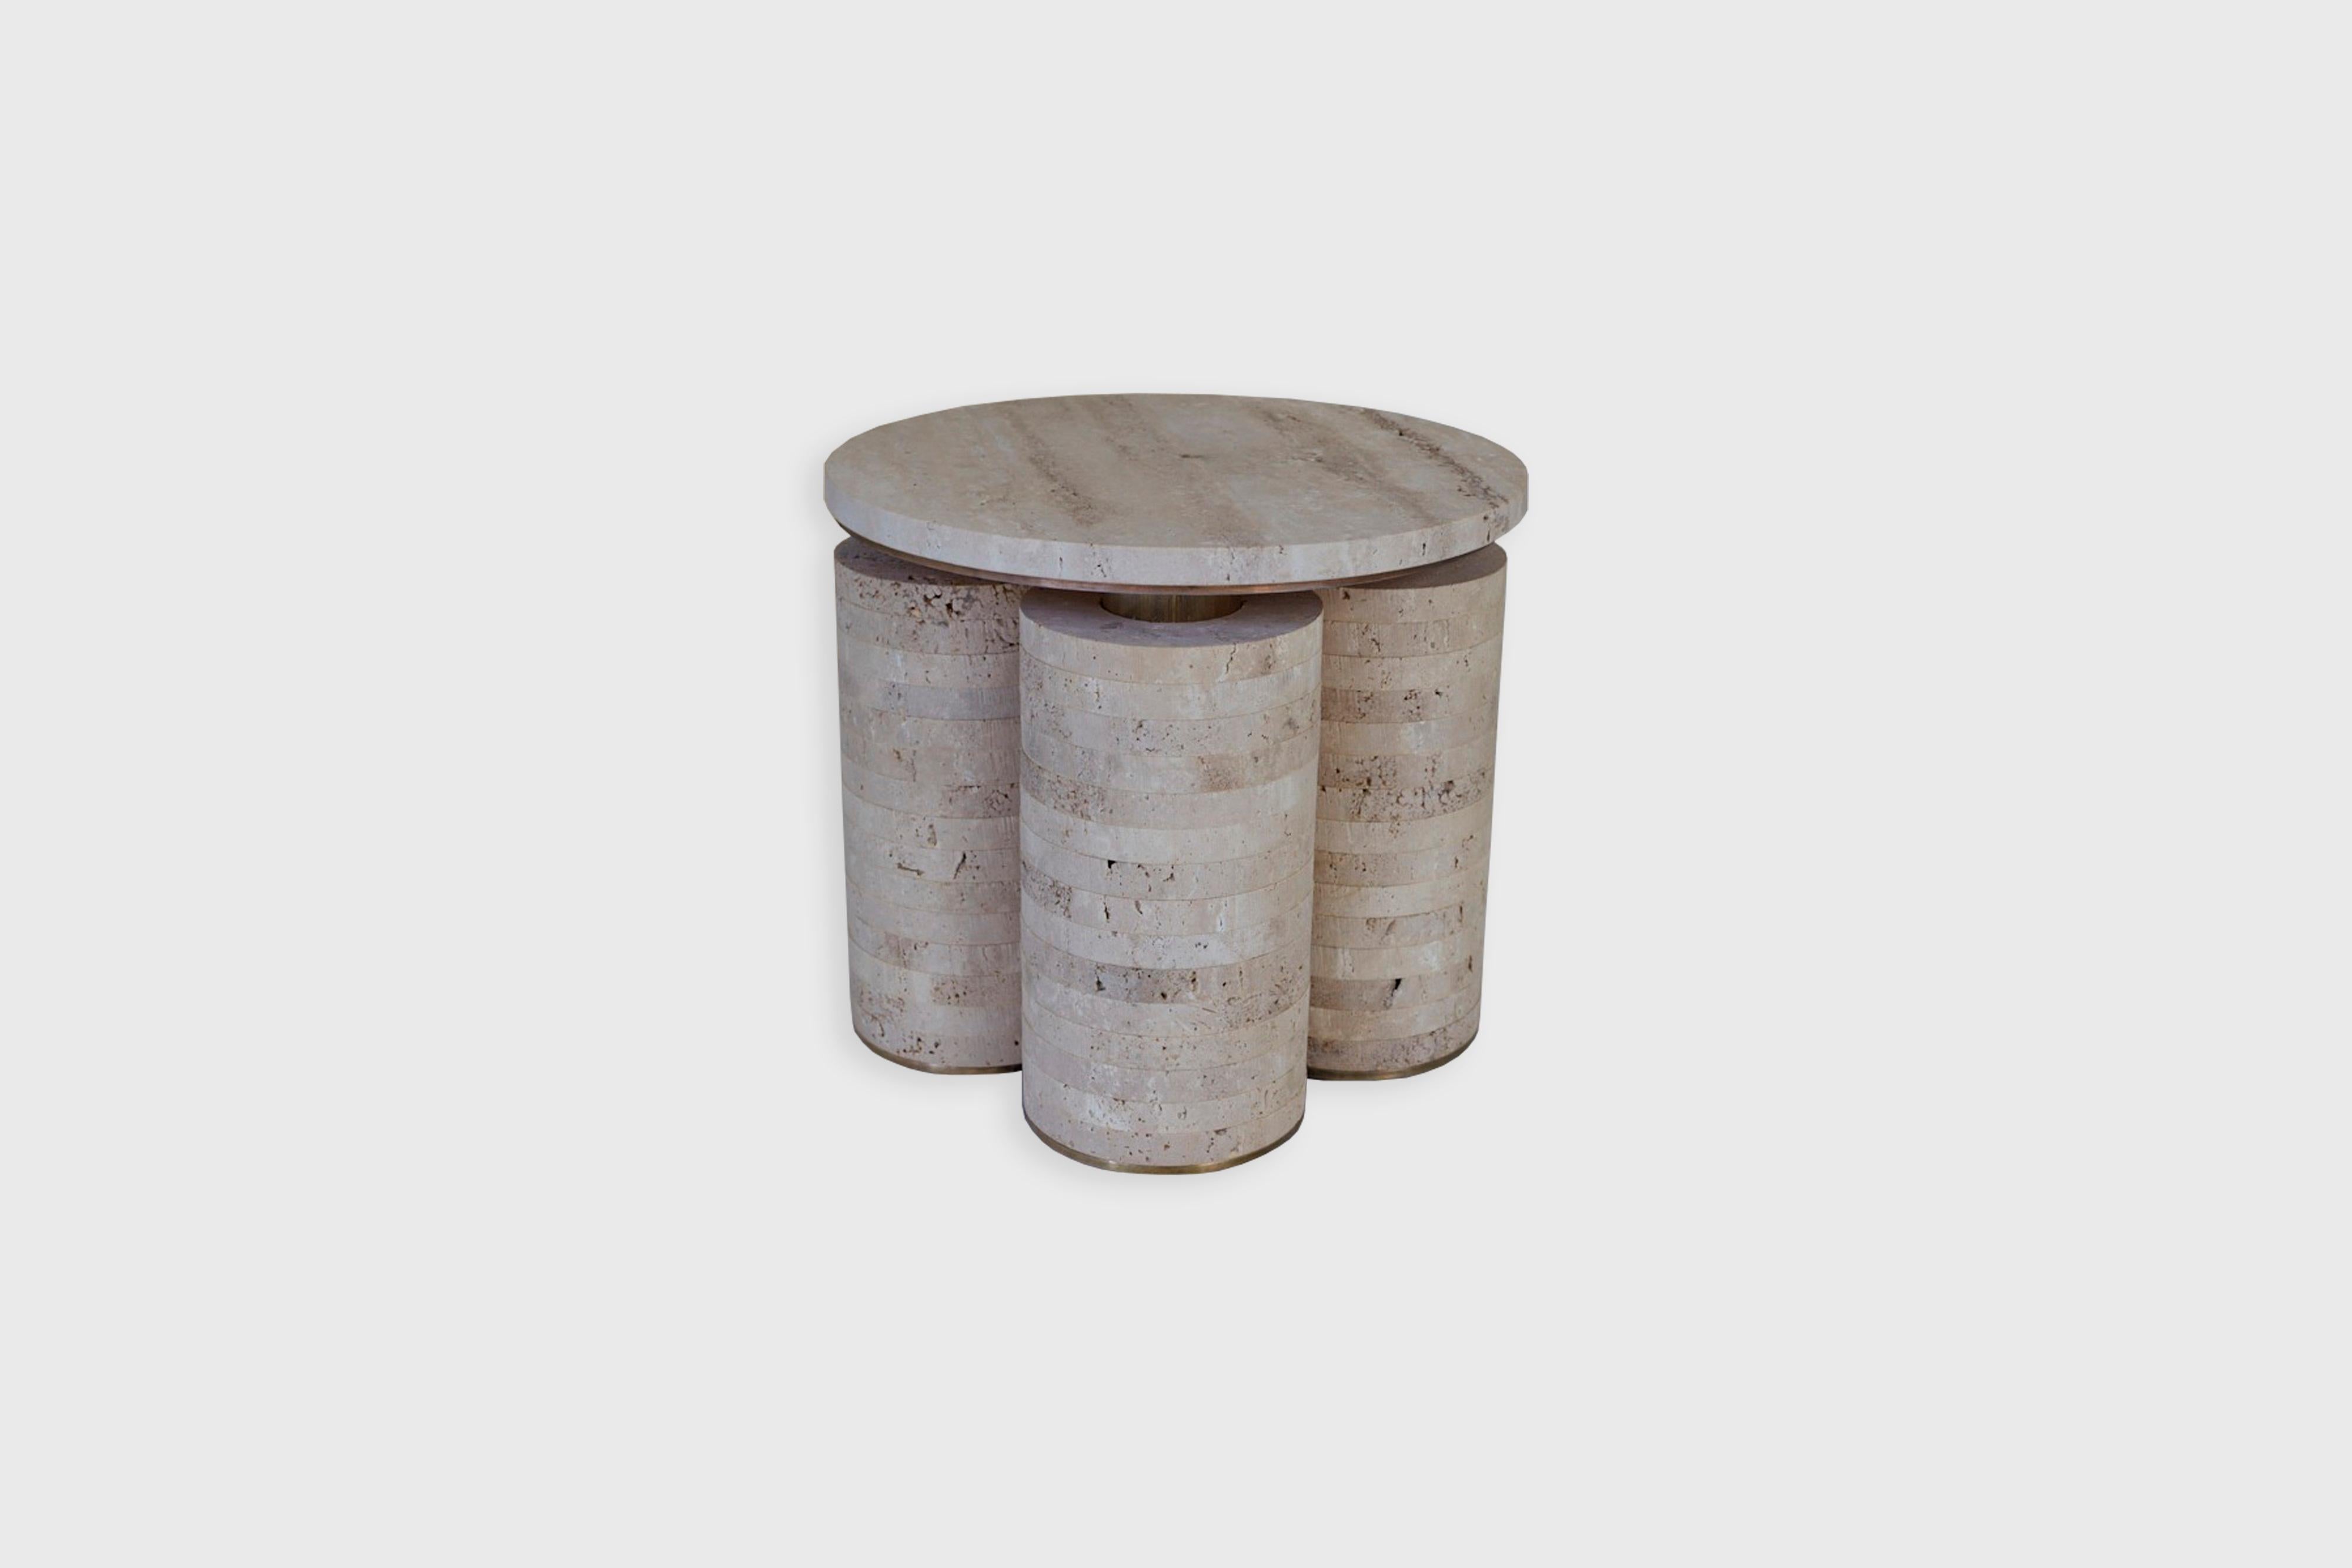 Trilith side table by Atra Design
Dimensions: D 43 x H 38 cm.
Materials: travertine, brass.
Other stones available.

Atra Design
We are Atra, a furniture brand produced by Atra form a mexico city–based high end production facility that also